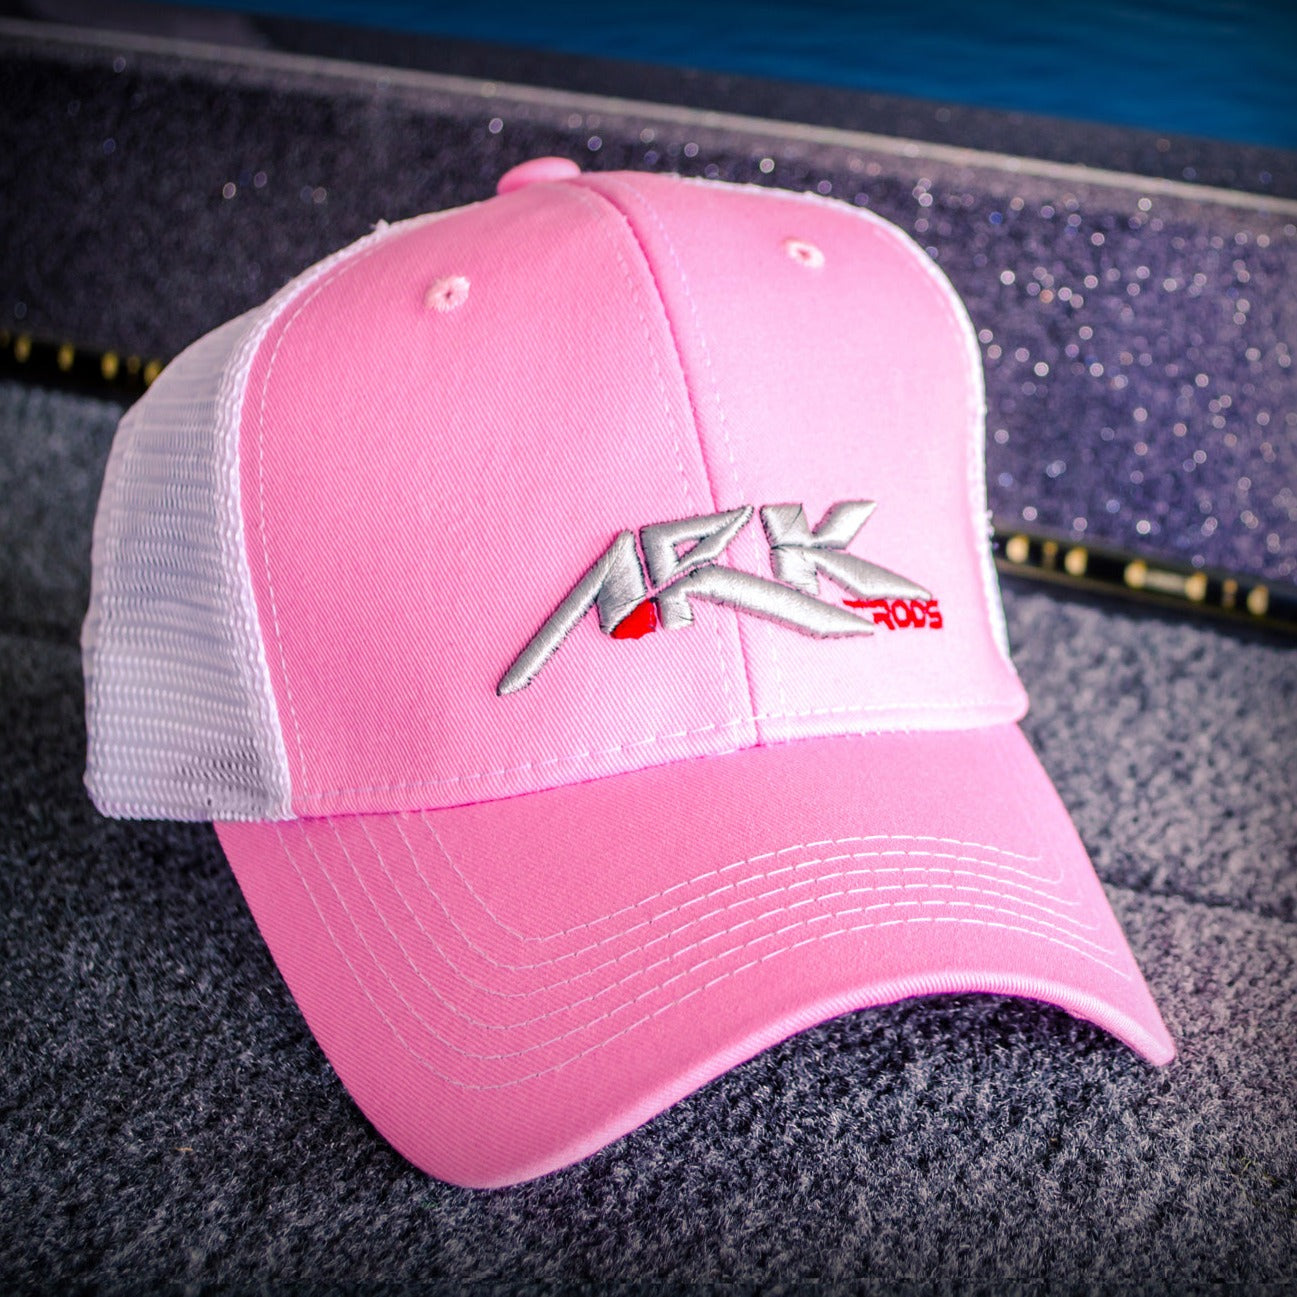 ARK Rods Snapback Hat + FREE SHIPPING